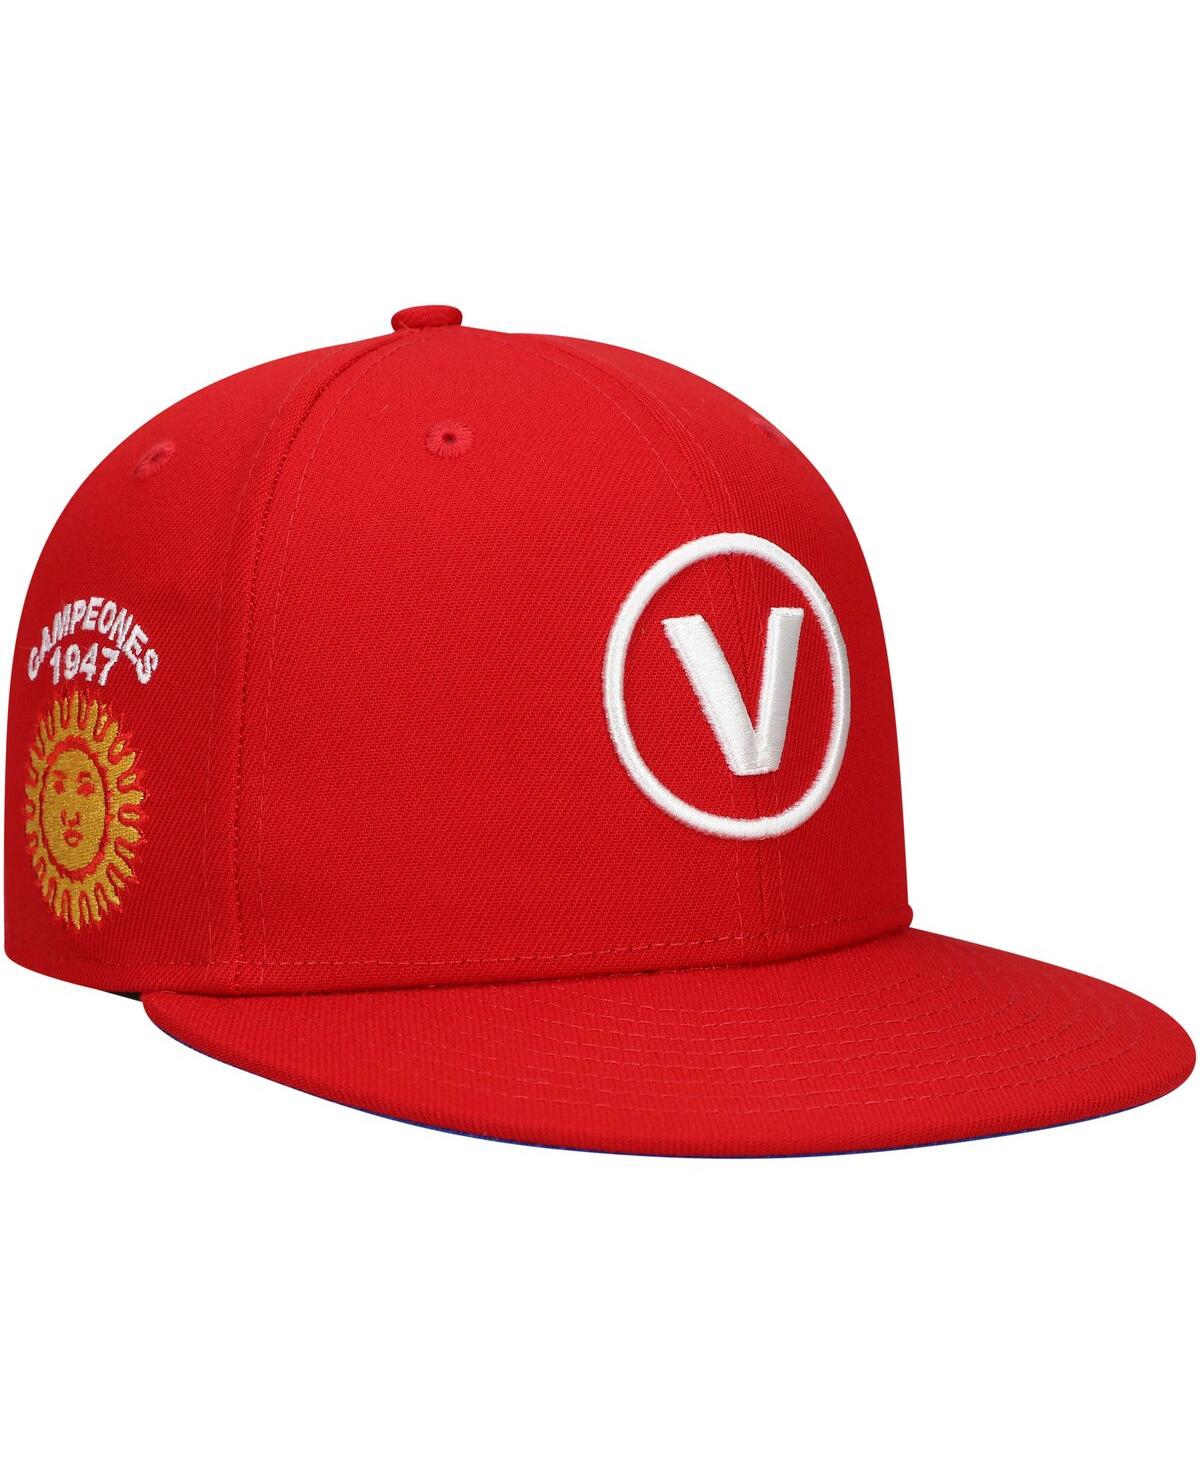 Men's Rings & Crwns Red Vargas Campeones Team Fitted Hat - Red